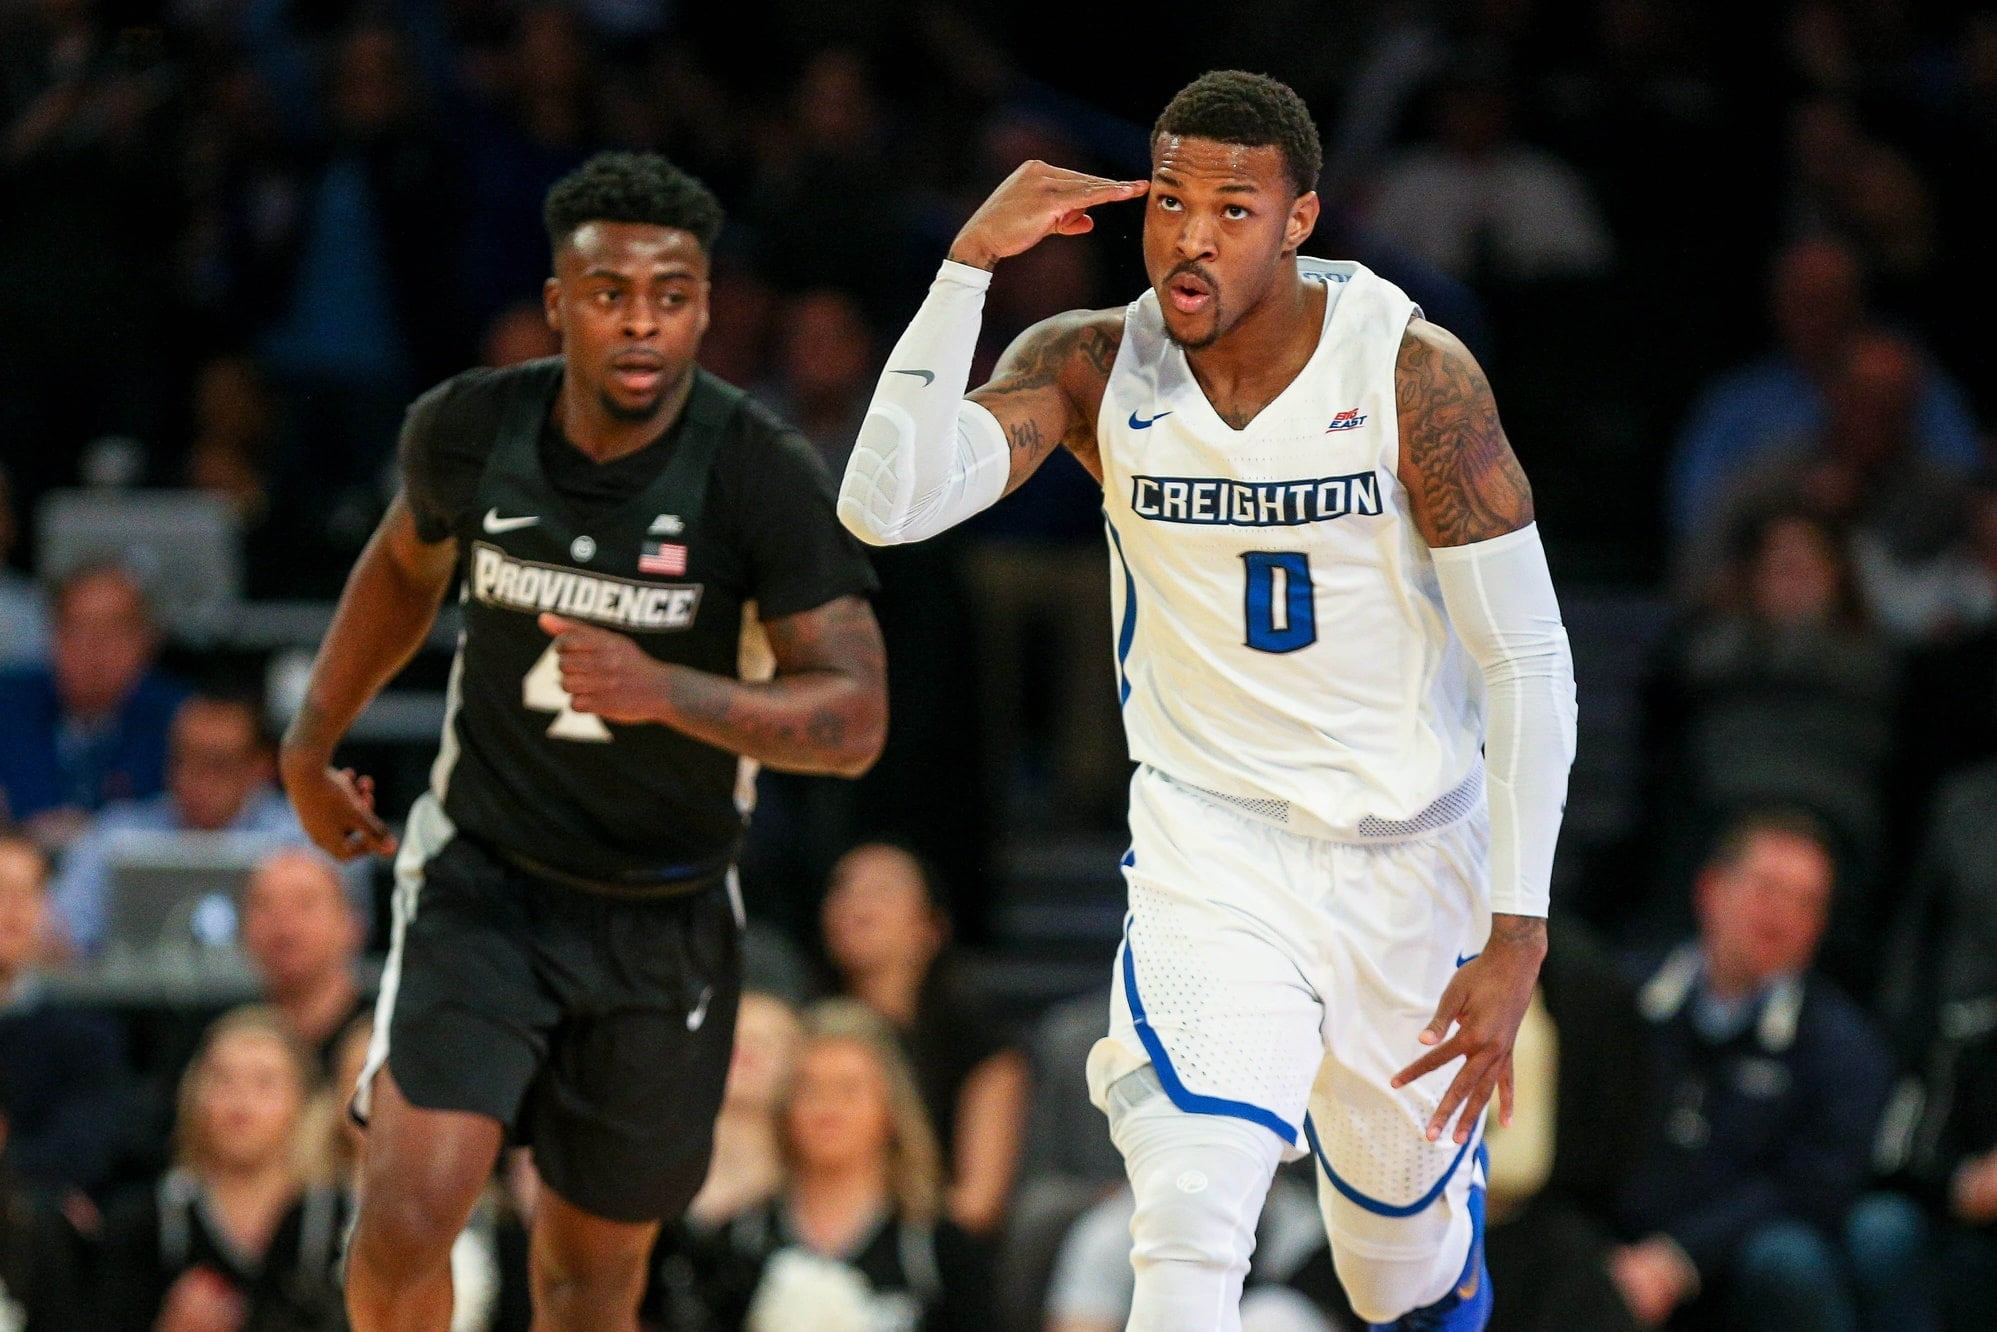 Eight Cinderella teams most likely to make the Final Four